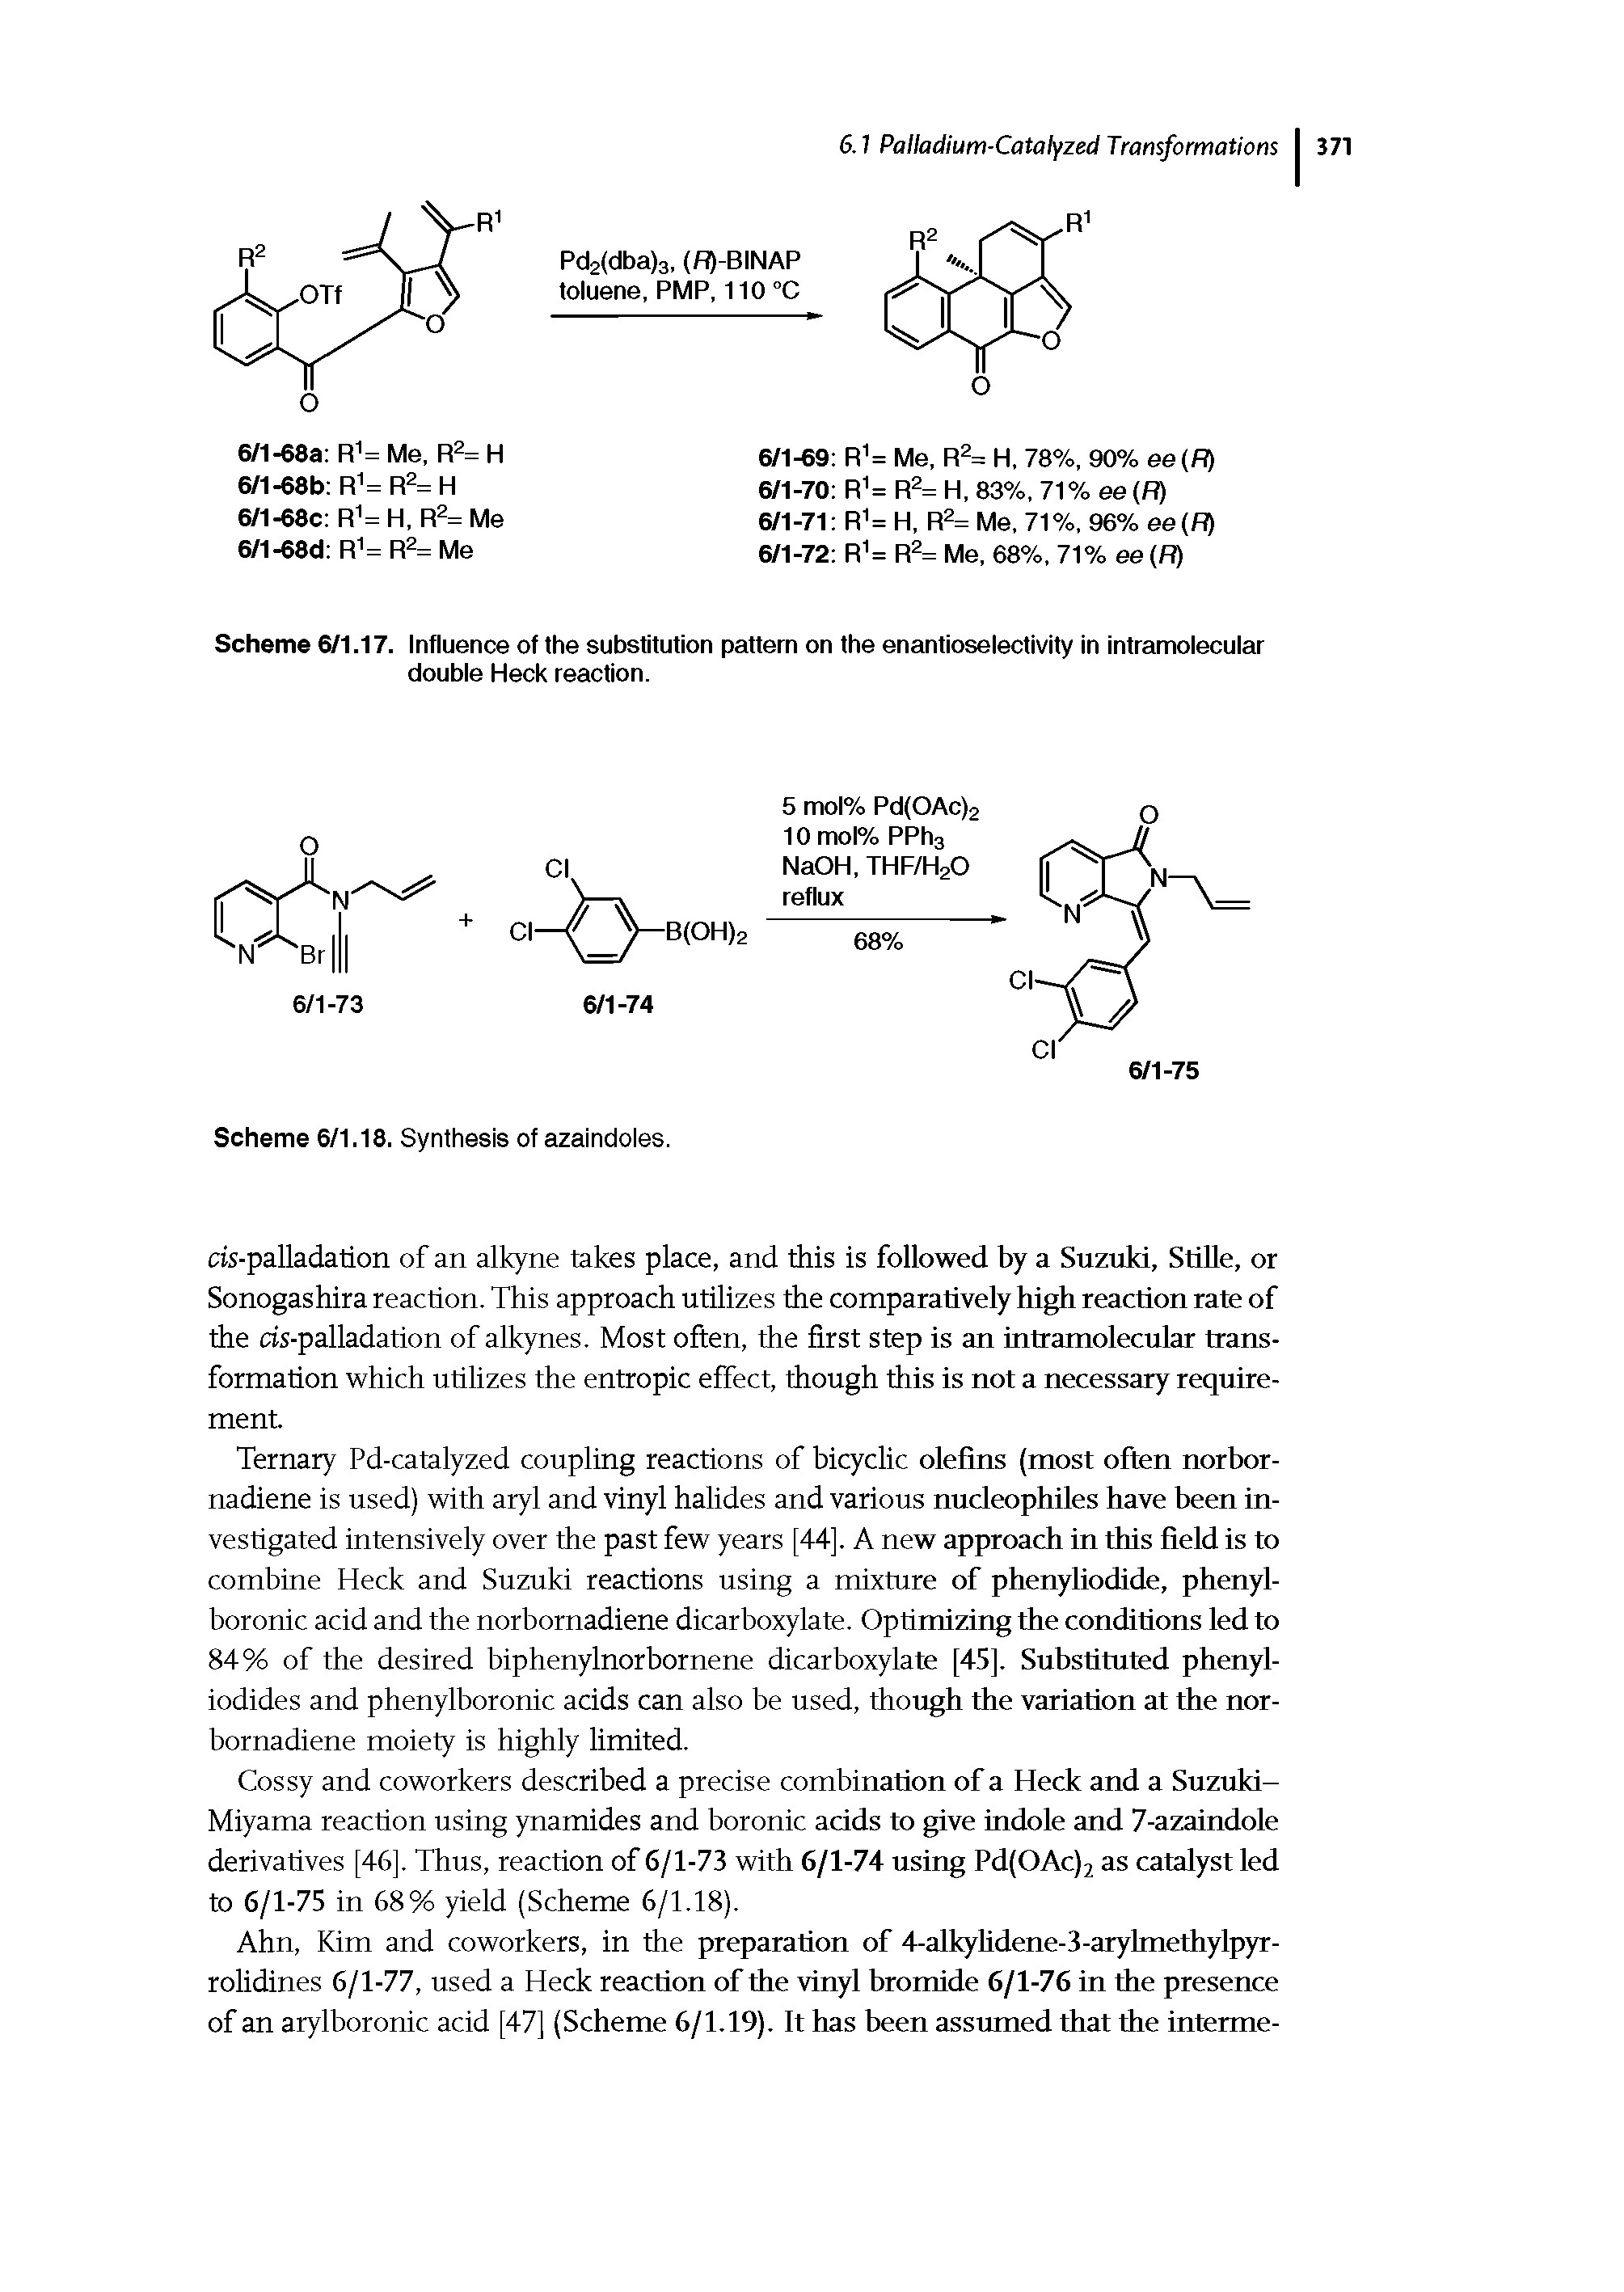 Scheme 6/1.17. Influence of the substitution pattern on the enantioselectivity in intramolecular double Heck reaction.